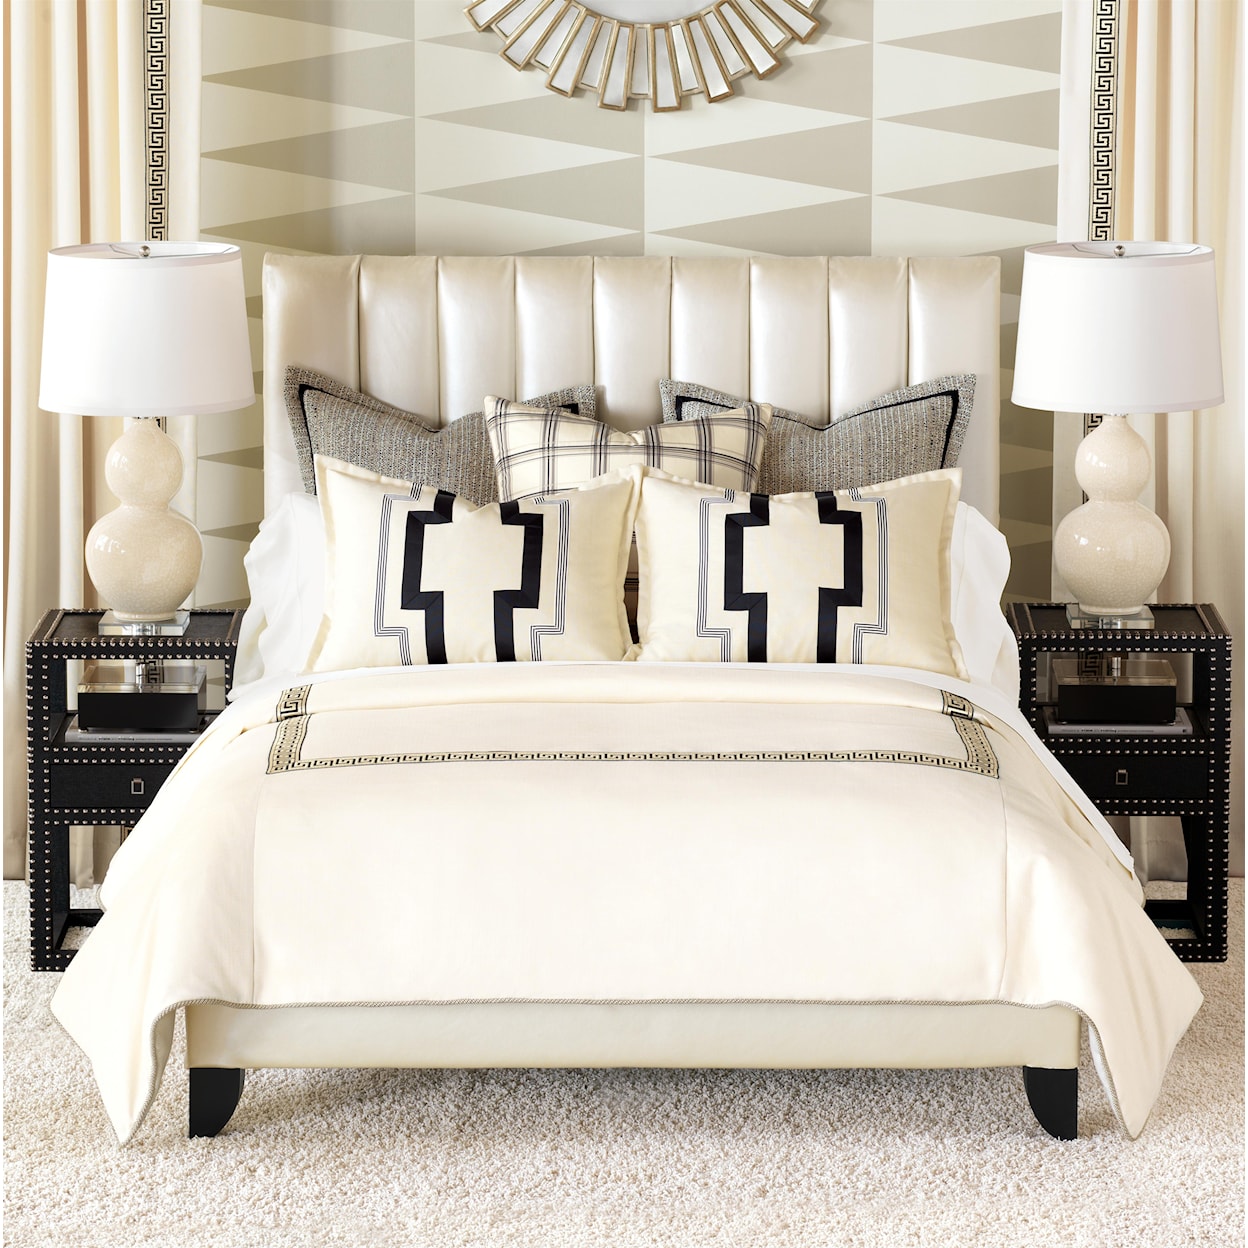 Eastern Accents Abernathy Full Button-Tufted Comforter